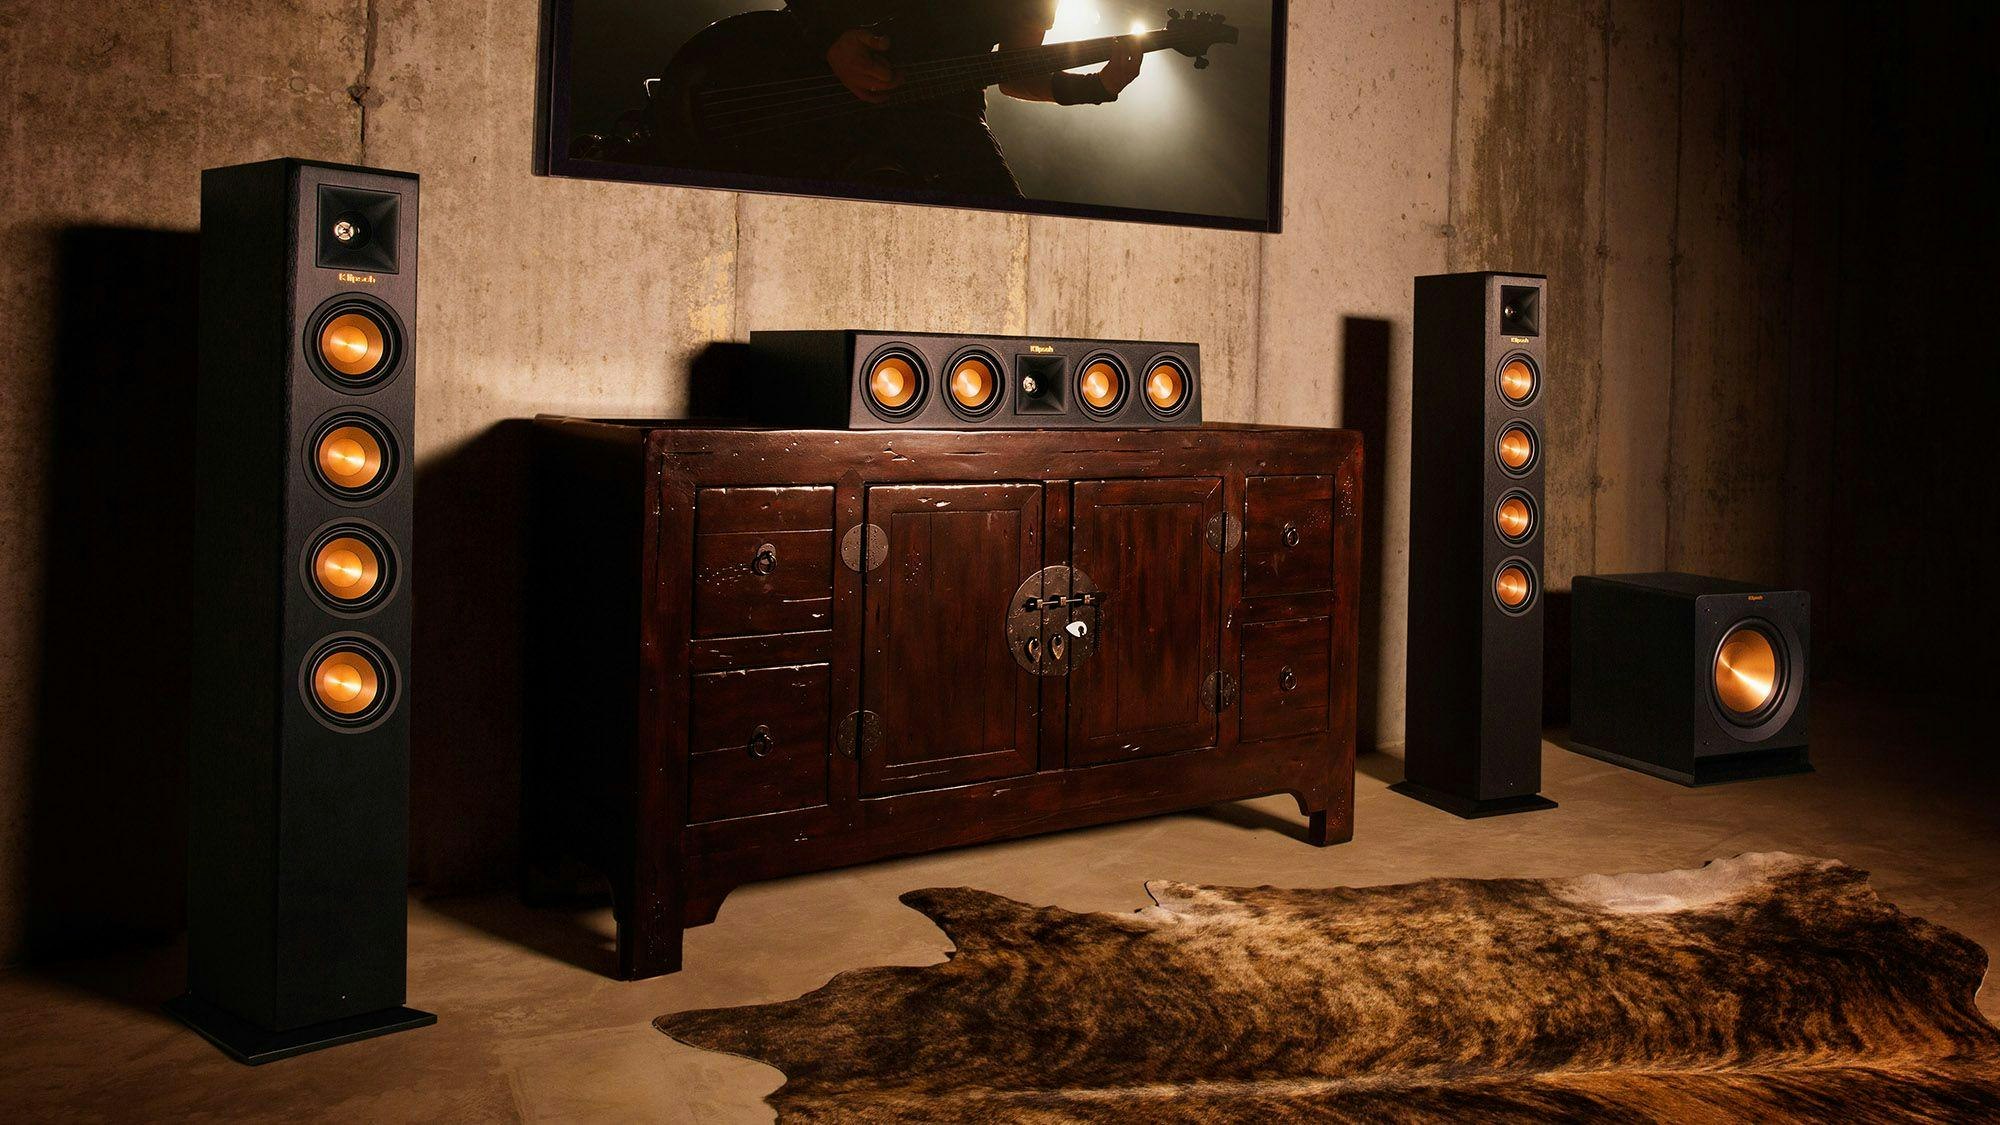 Klipsch wireless speakers flanking a tv and wood cabinet